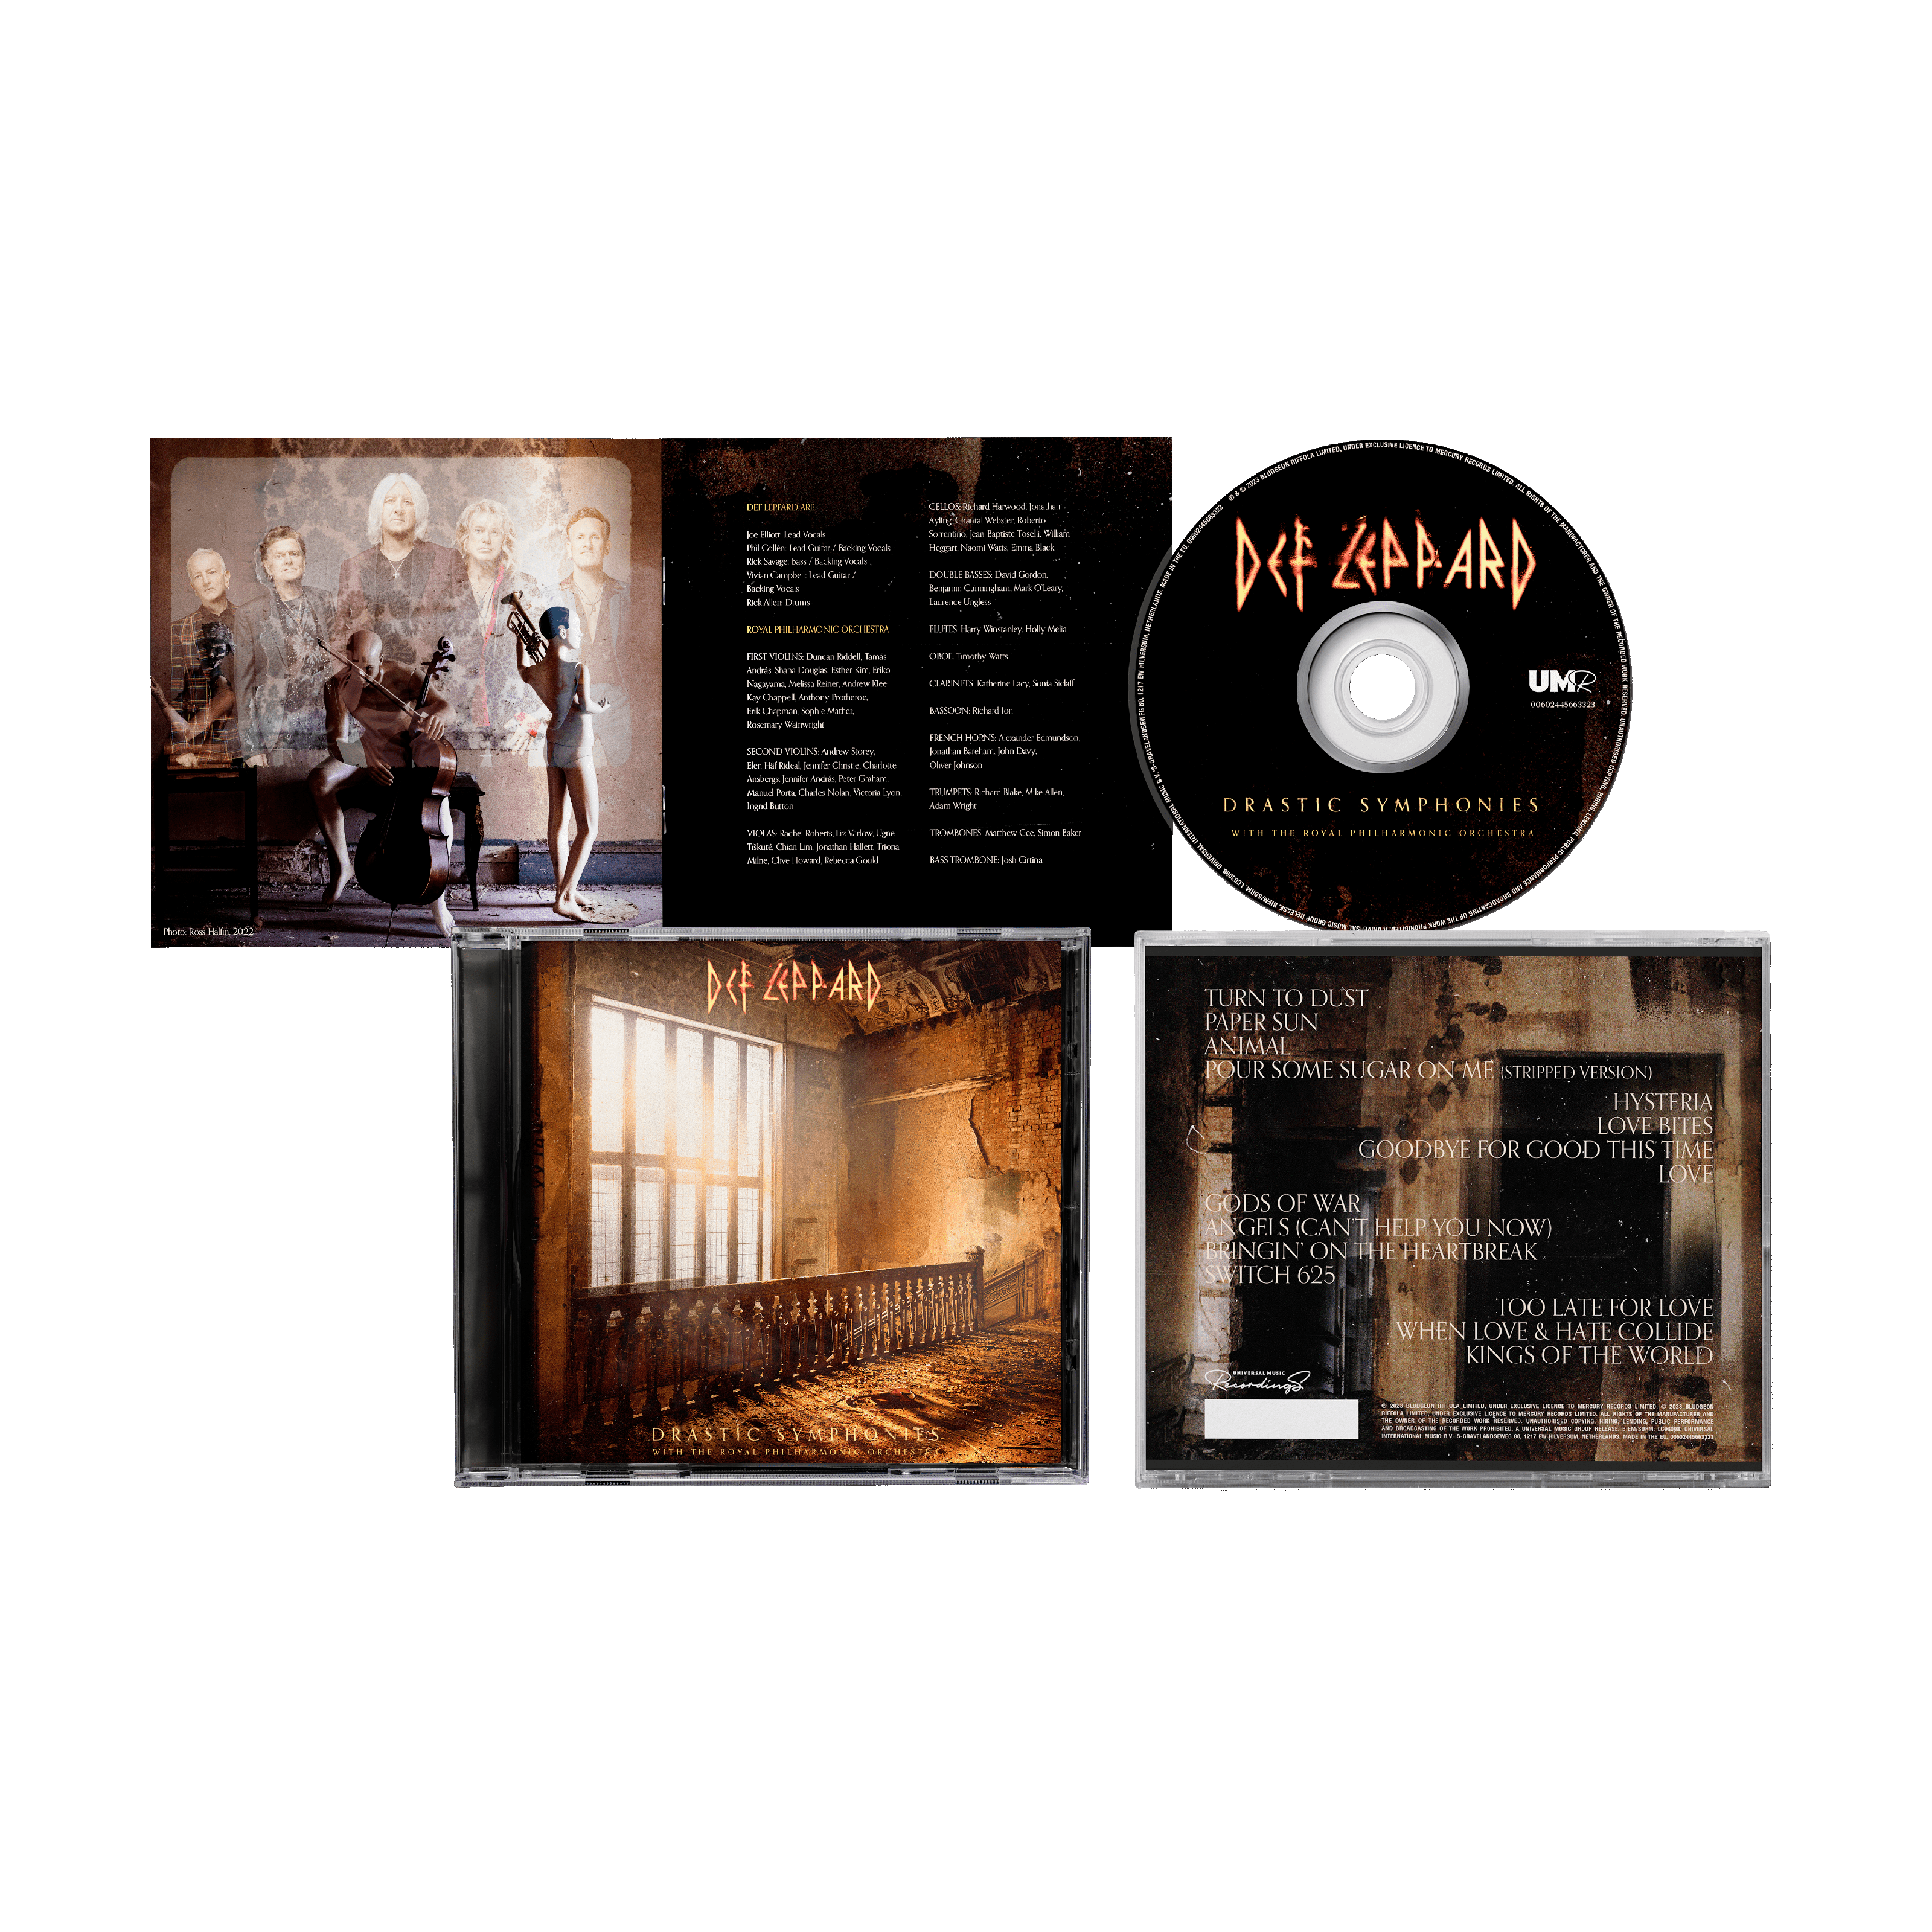 Def Leppard, The Royal Philharmonic Orchestra - Drastic Symphonies: CD